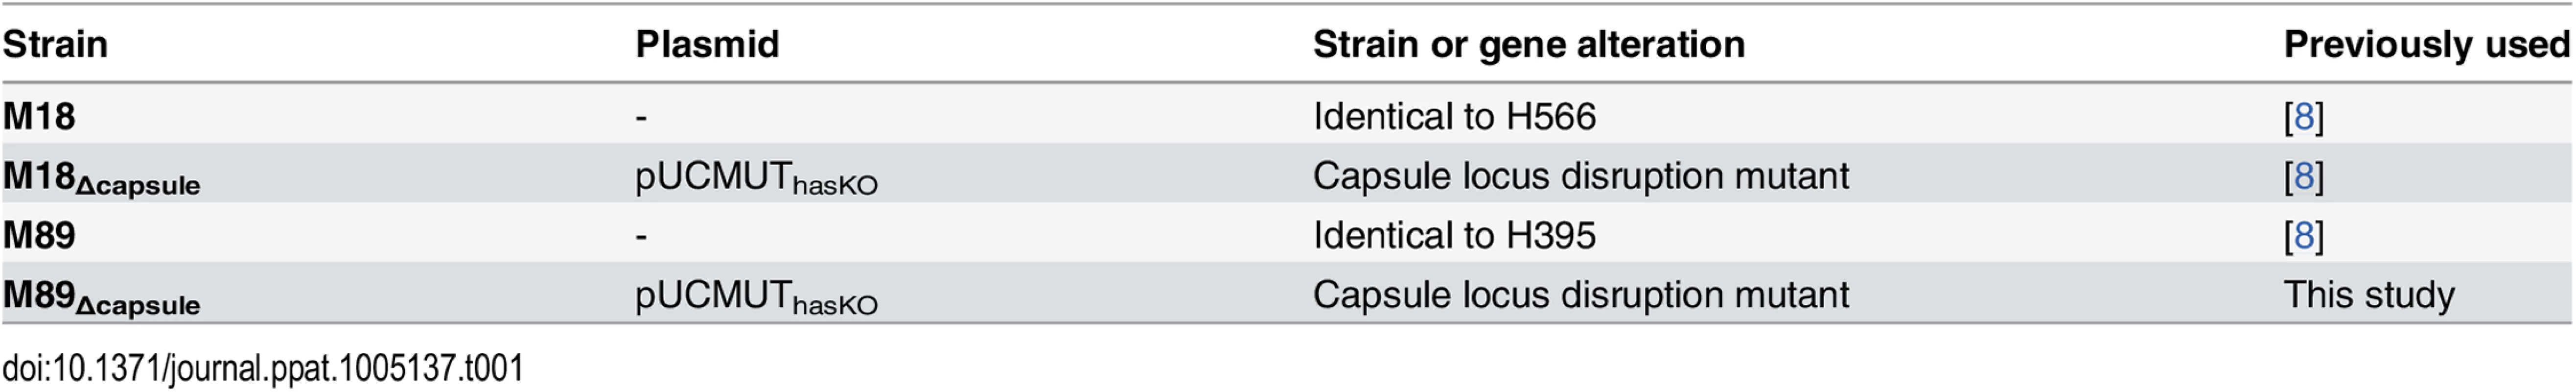 Bacterial strains used in this study.